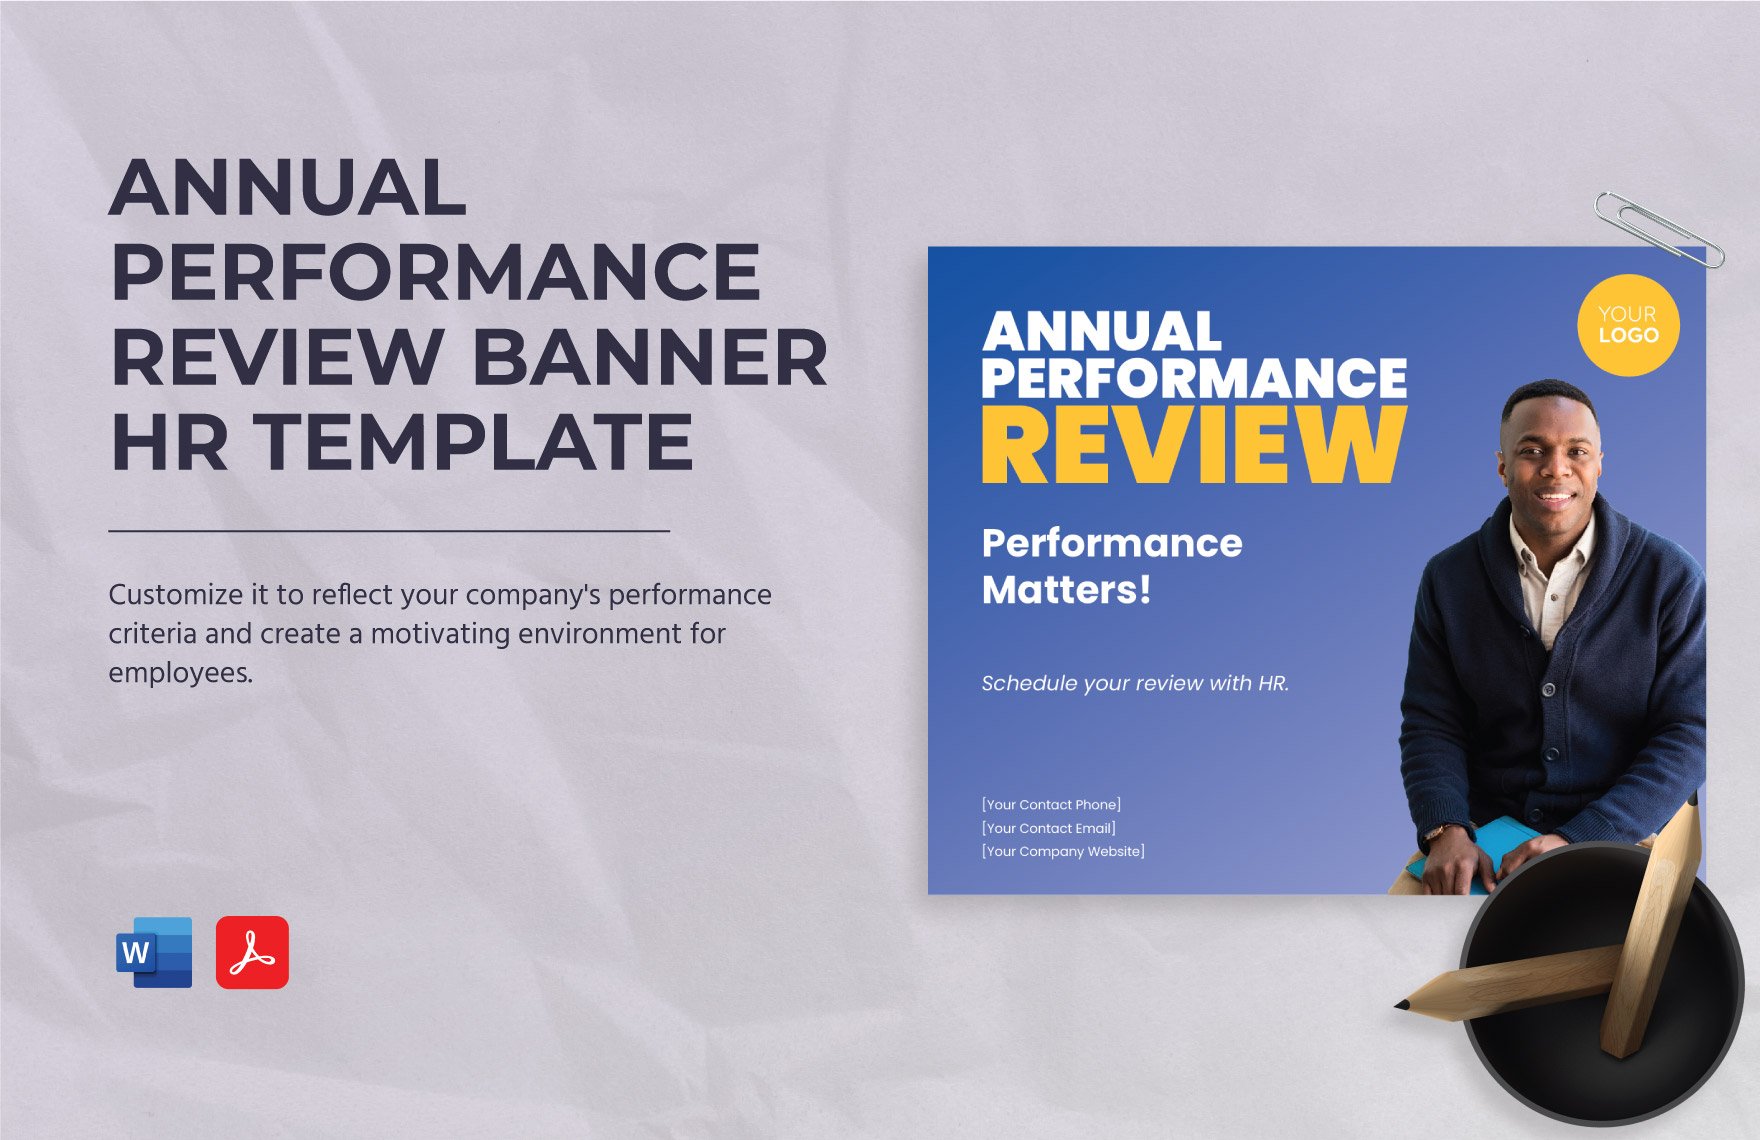 Annual Performance Review Banner HR Template